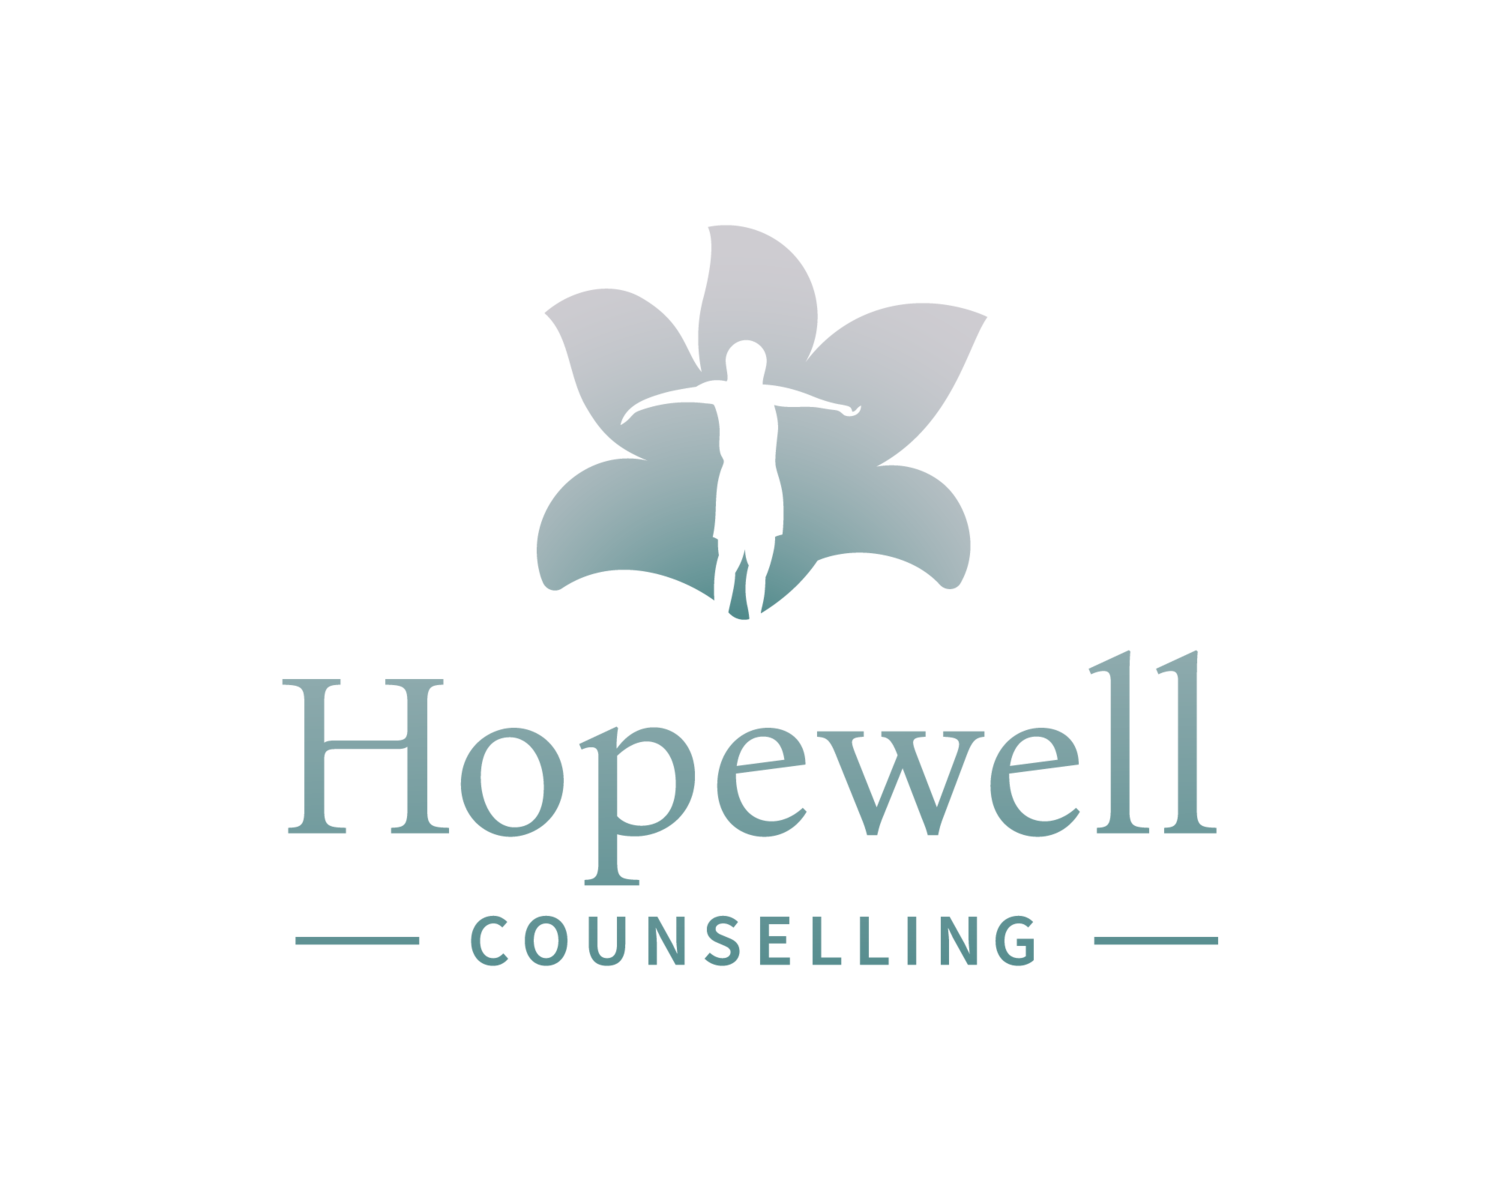 Hopewell Counselling